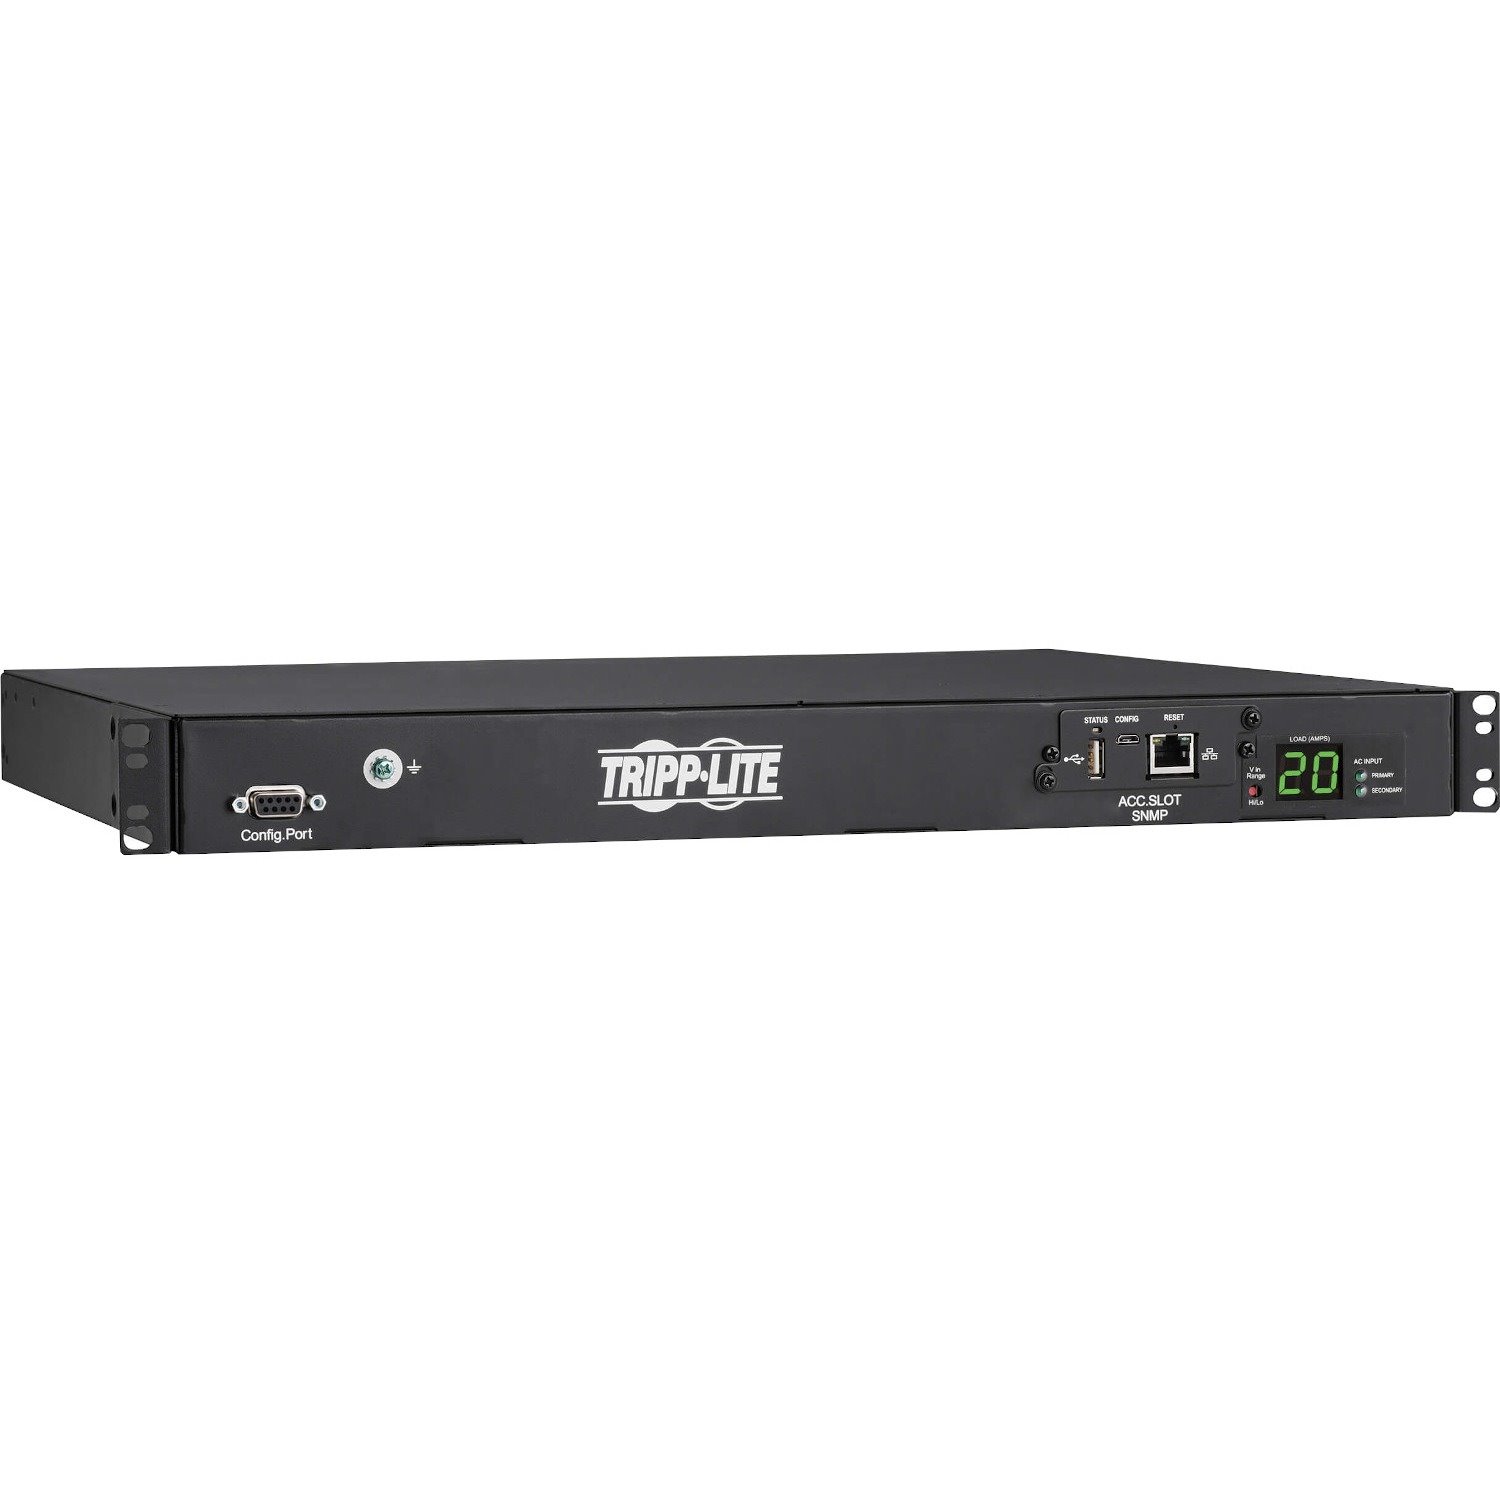 Tripp Lite by Eaton 3.8kW 200-240V Single-Phase ATS/Monitored PDU - 8 C13 and 2 C19 Outlets, Dual C20 Inlets, 12 ft. Cords, Network Card, 1U, TAA